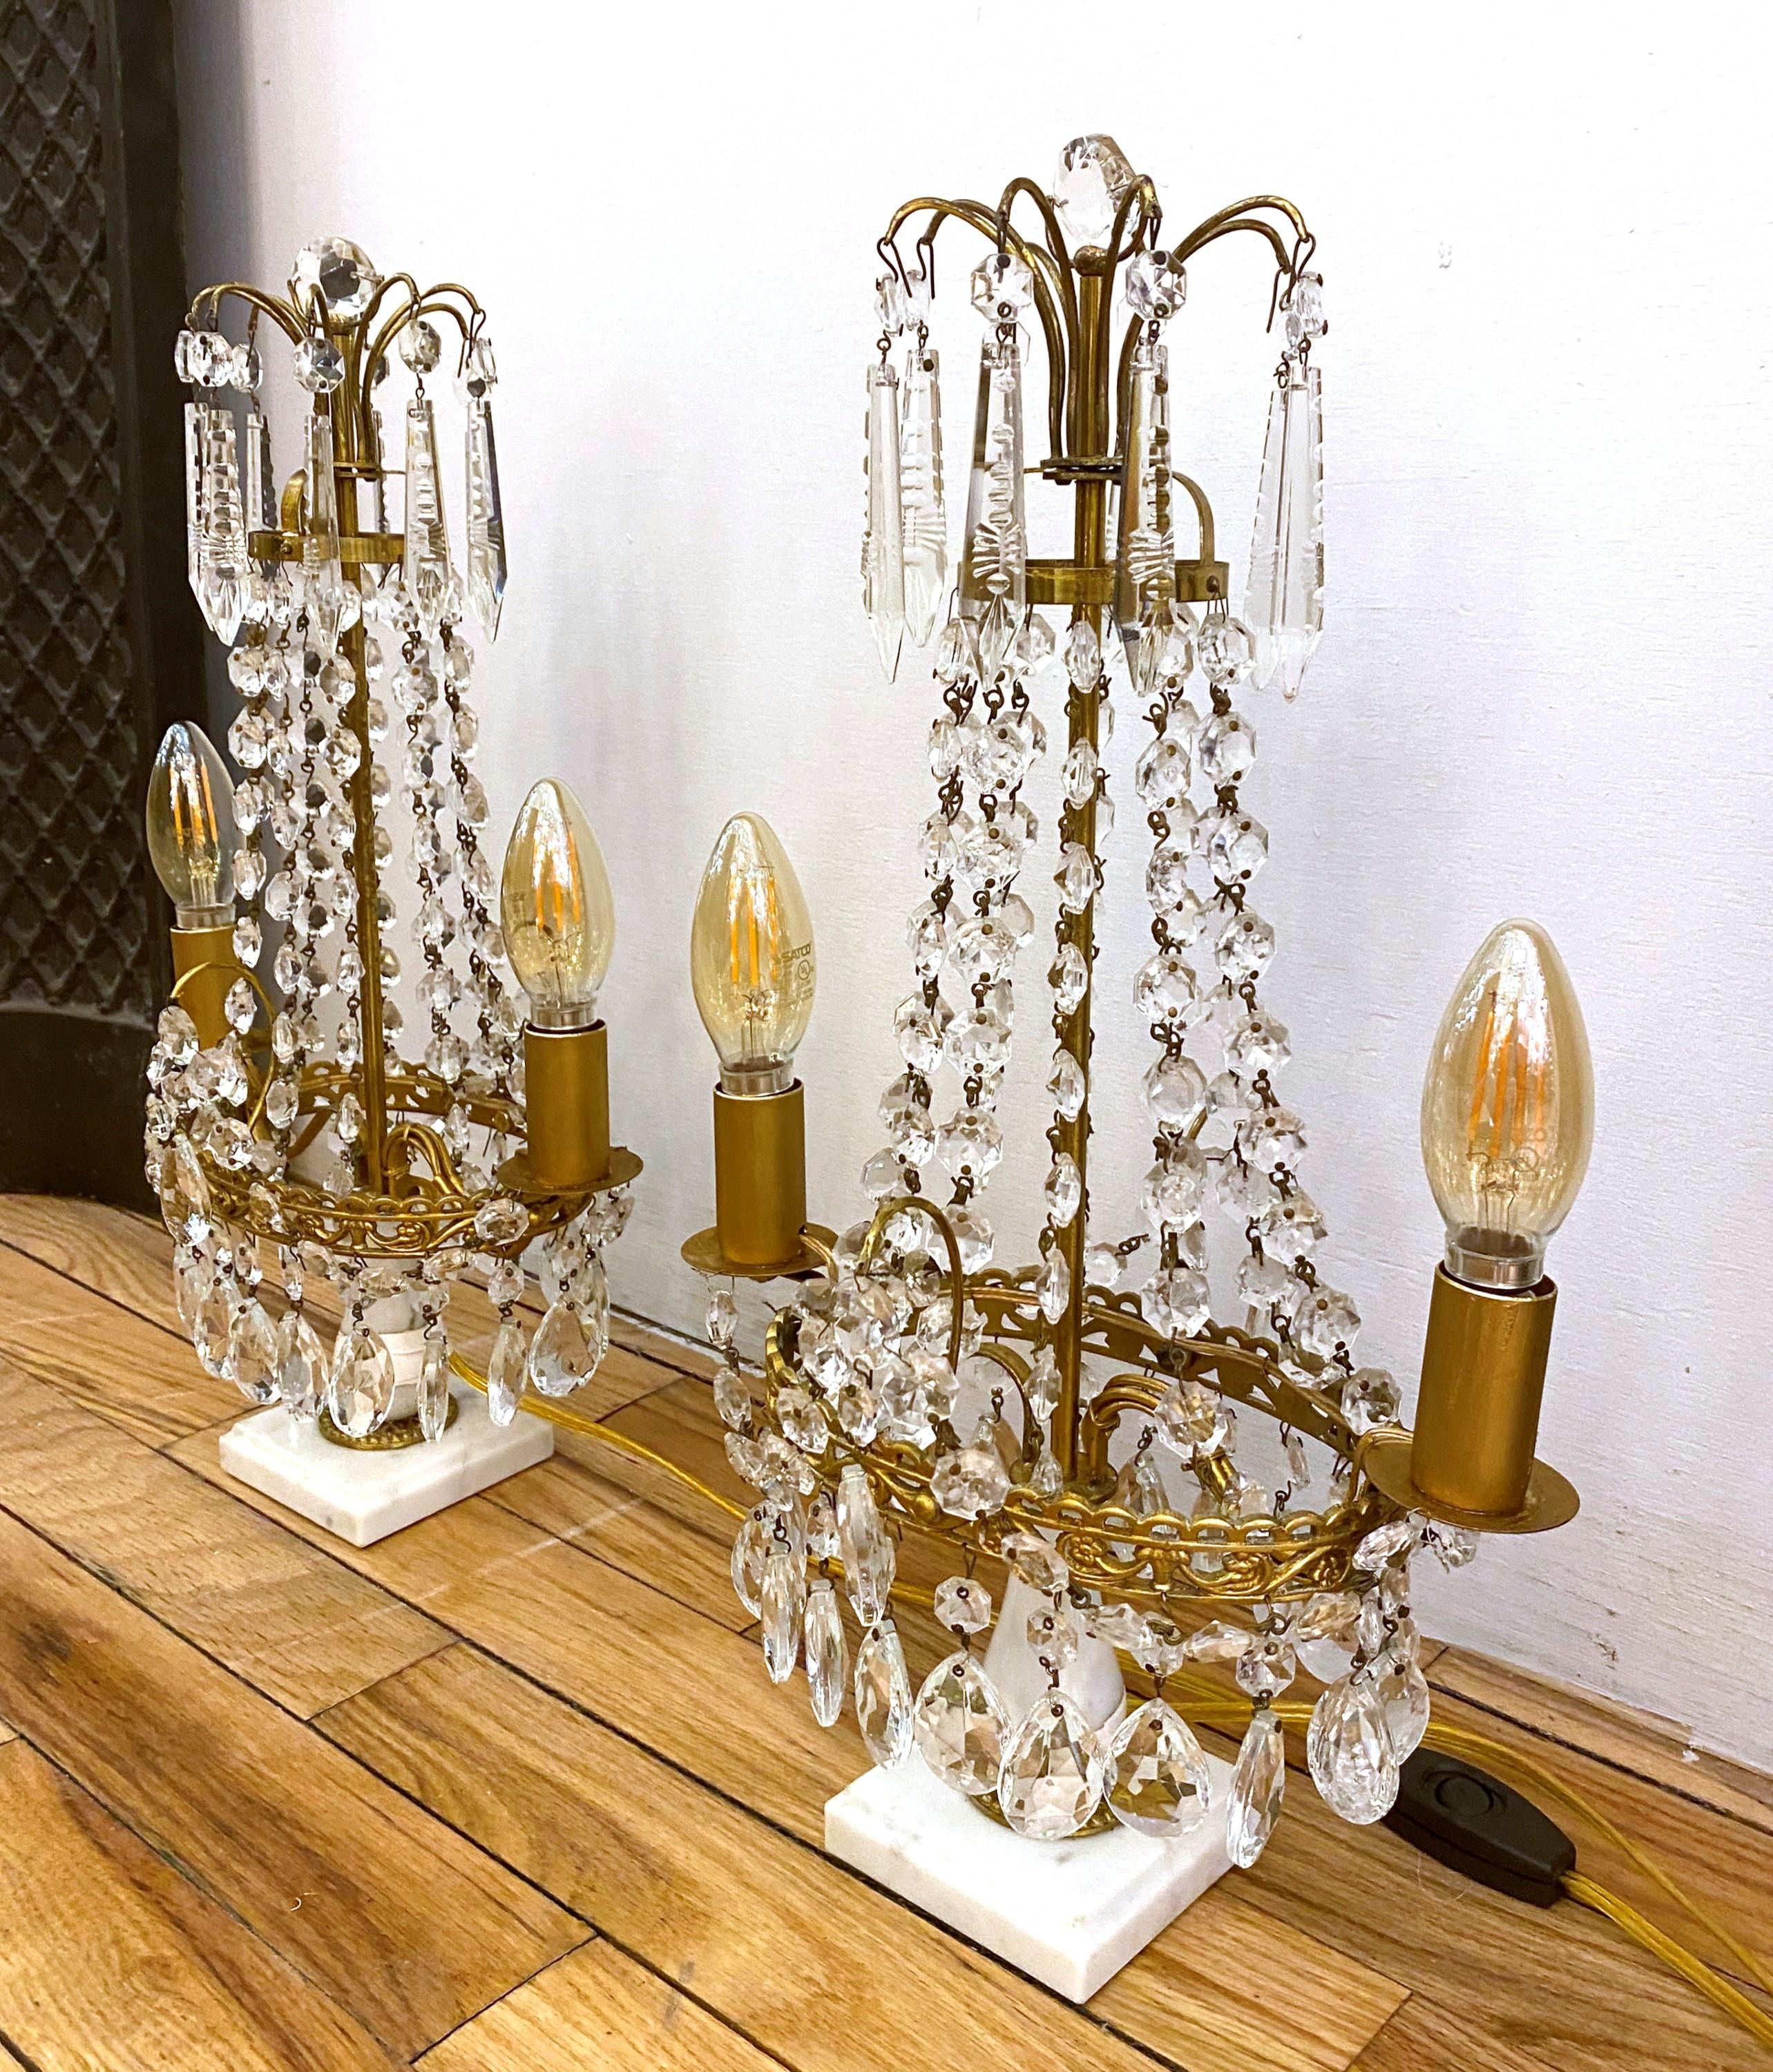 1890s Swedish Gustavian style pair of two light candelabra crystal and brass table lamps featuring a white marble base each. These have now been converted to electric. Each light takes two candelabra light bulbs. Cleaned and restored. Priced as a